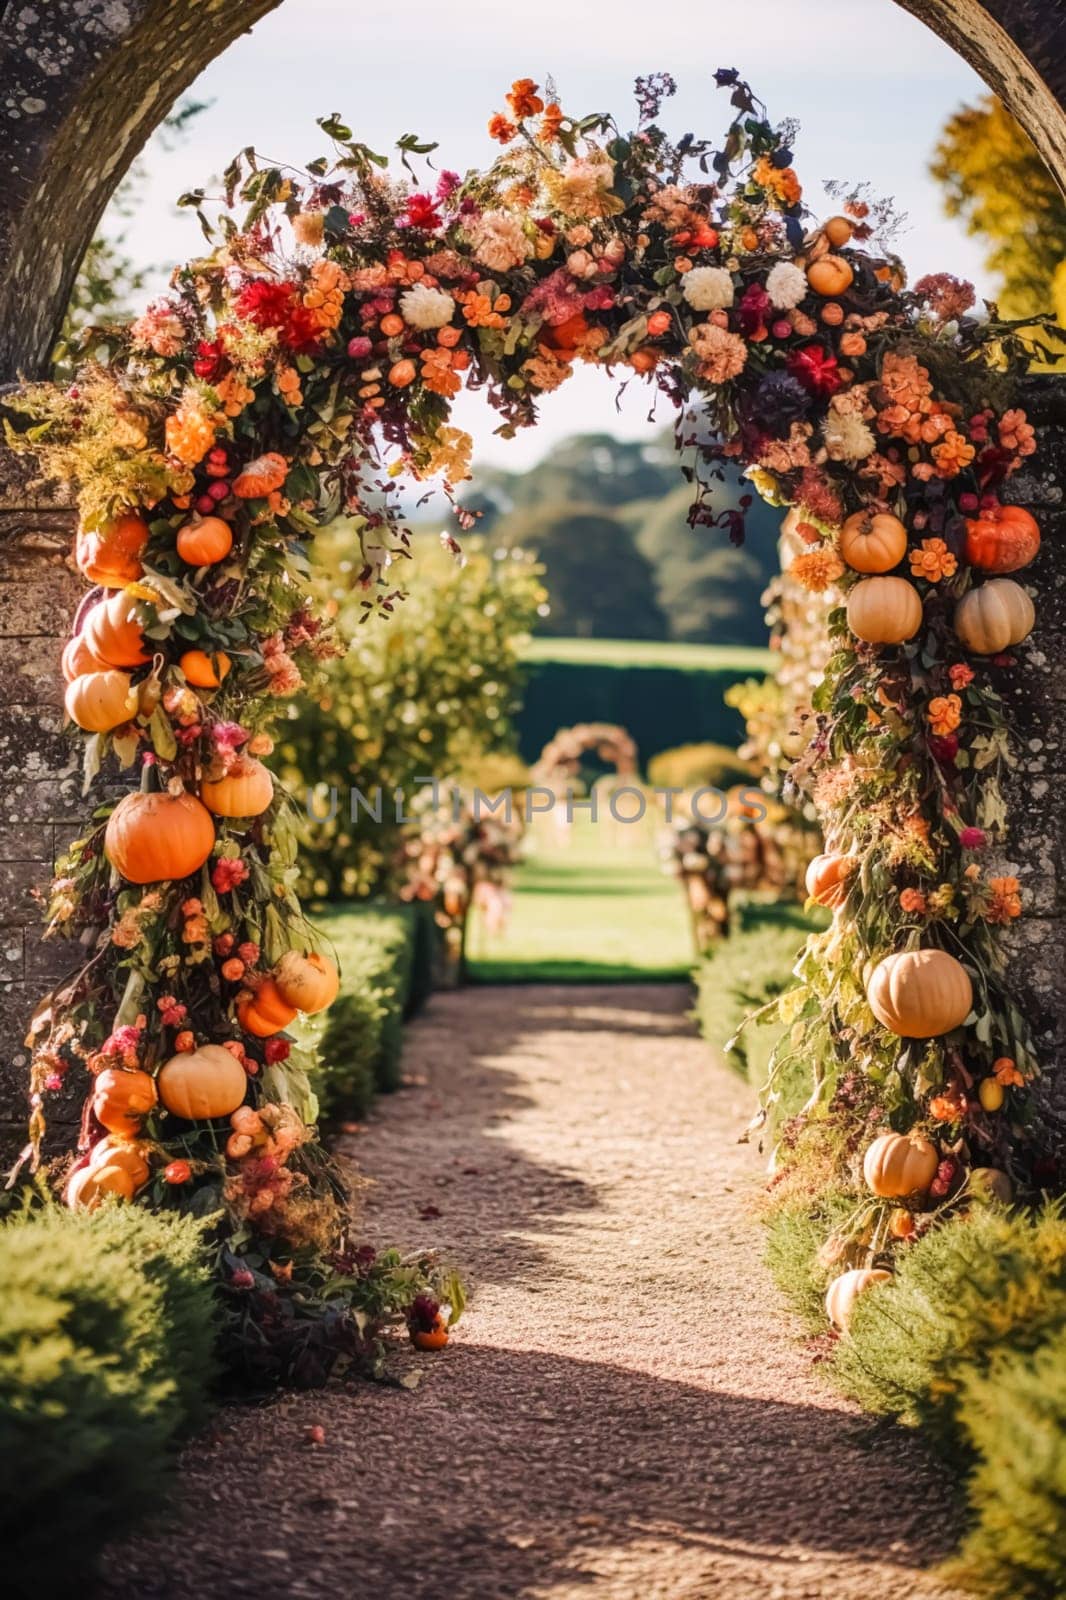 Wedding aisle, floral decor and marriage ceremony, autumnal flowers and decoration in the English countryside garden, autumn country style by Anneleven